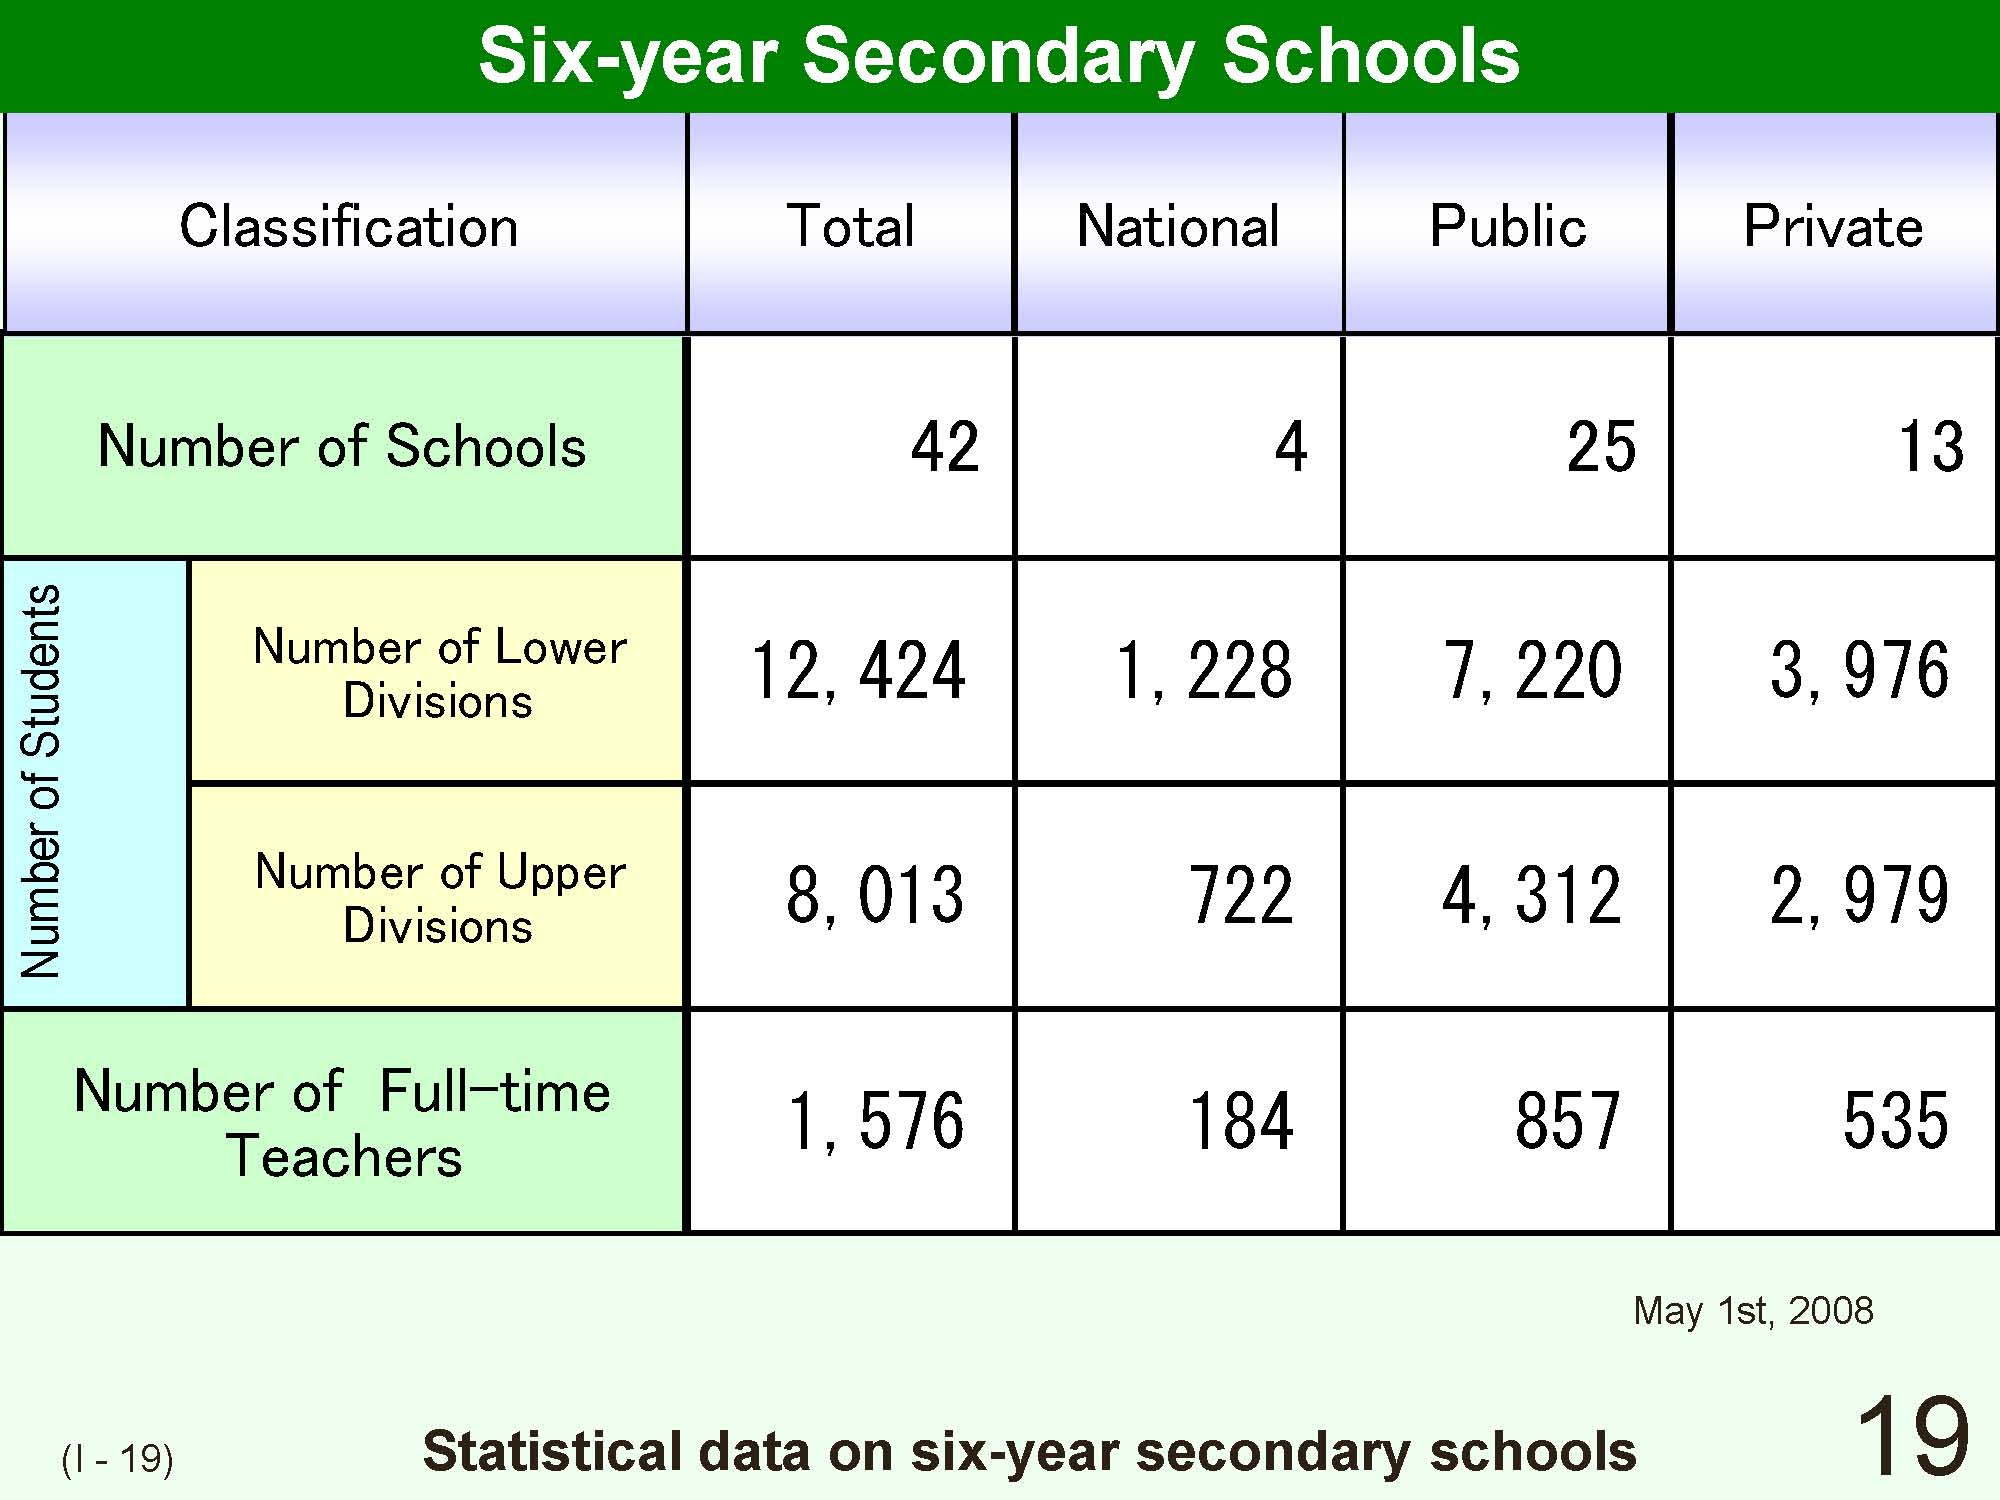 Japanese School Ages